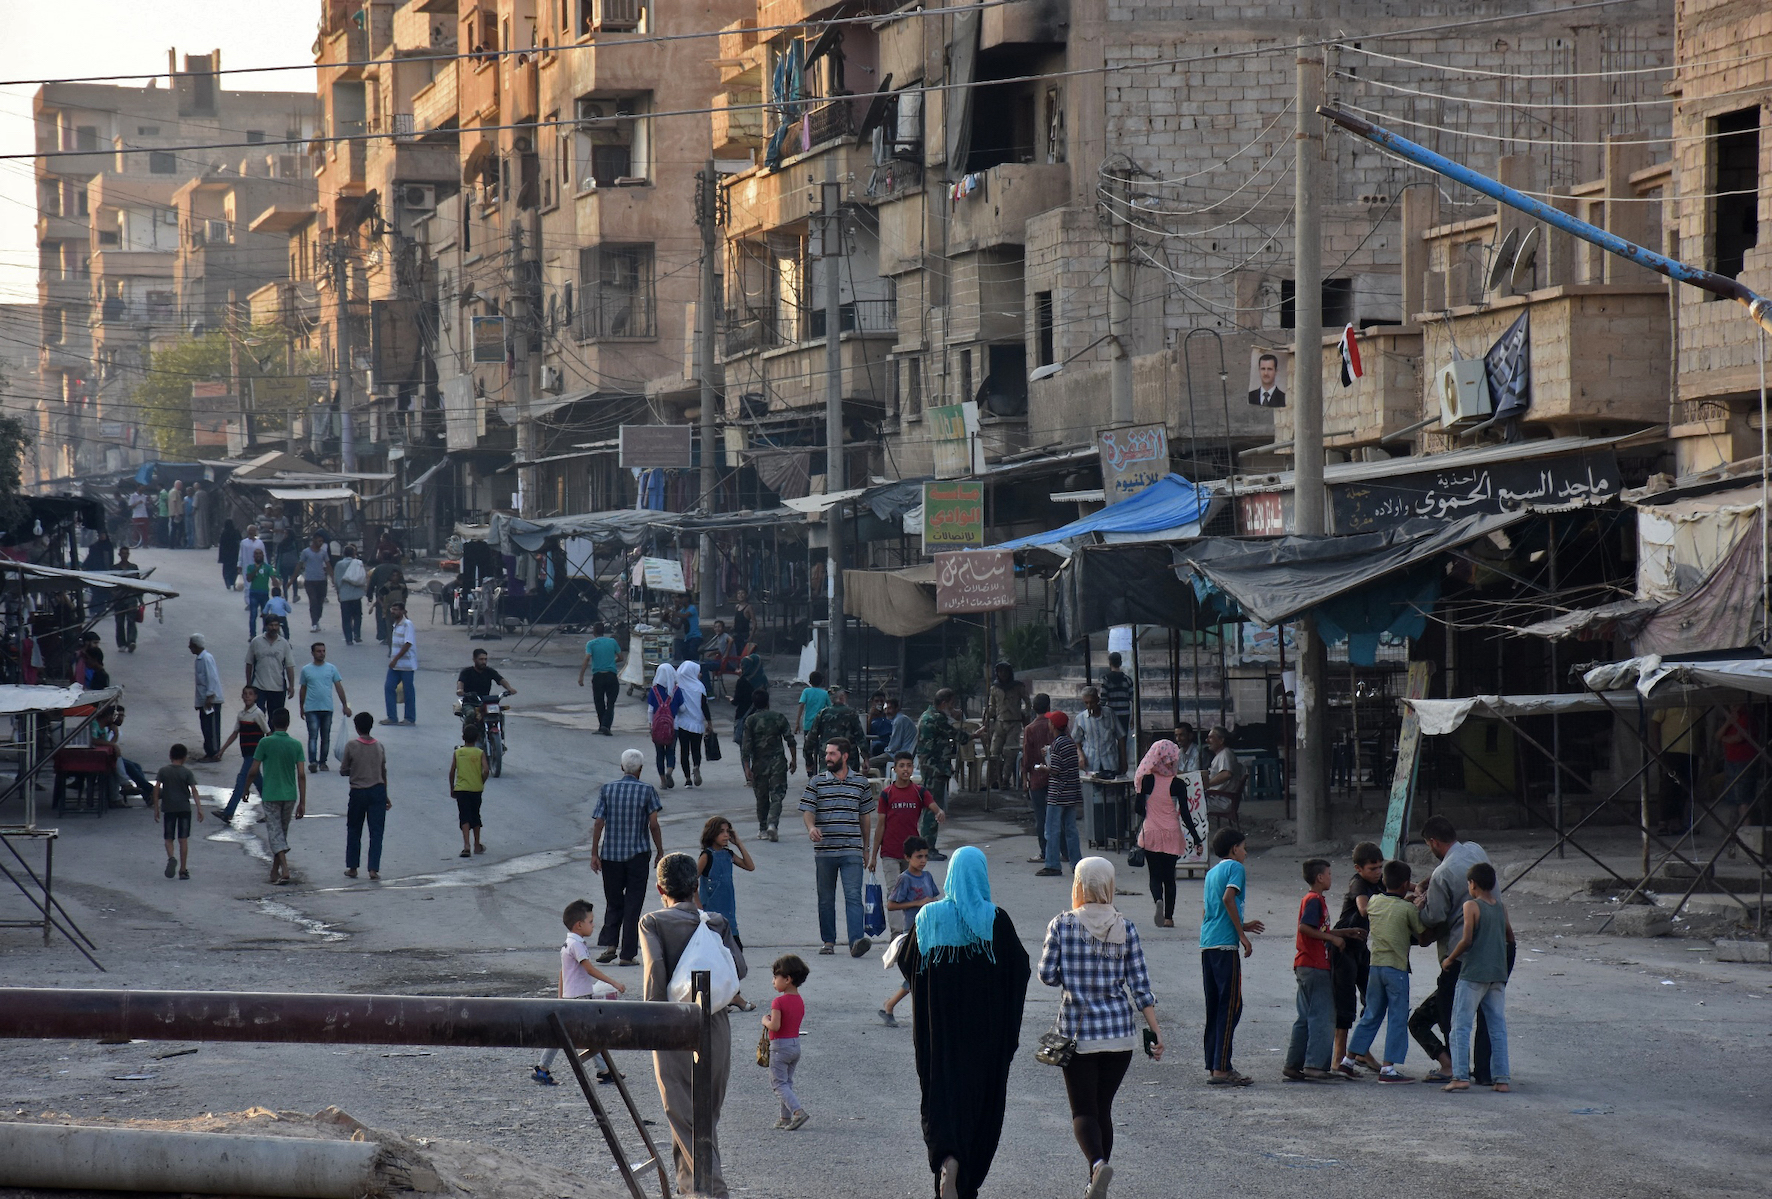 A general view shows Syrians walking down a street in the eastern city of Deir Ezzor (AFP/ George Ourfalian)